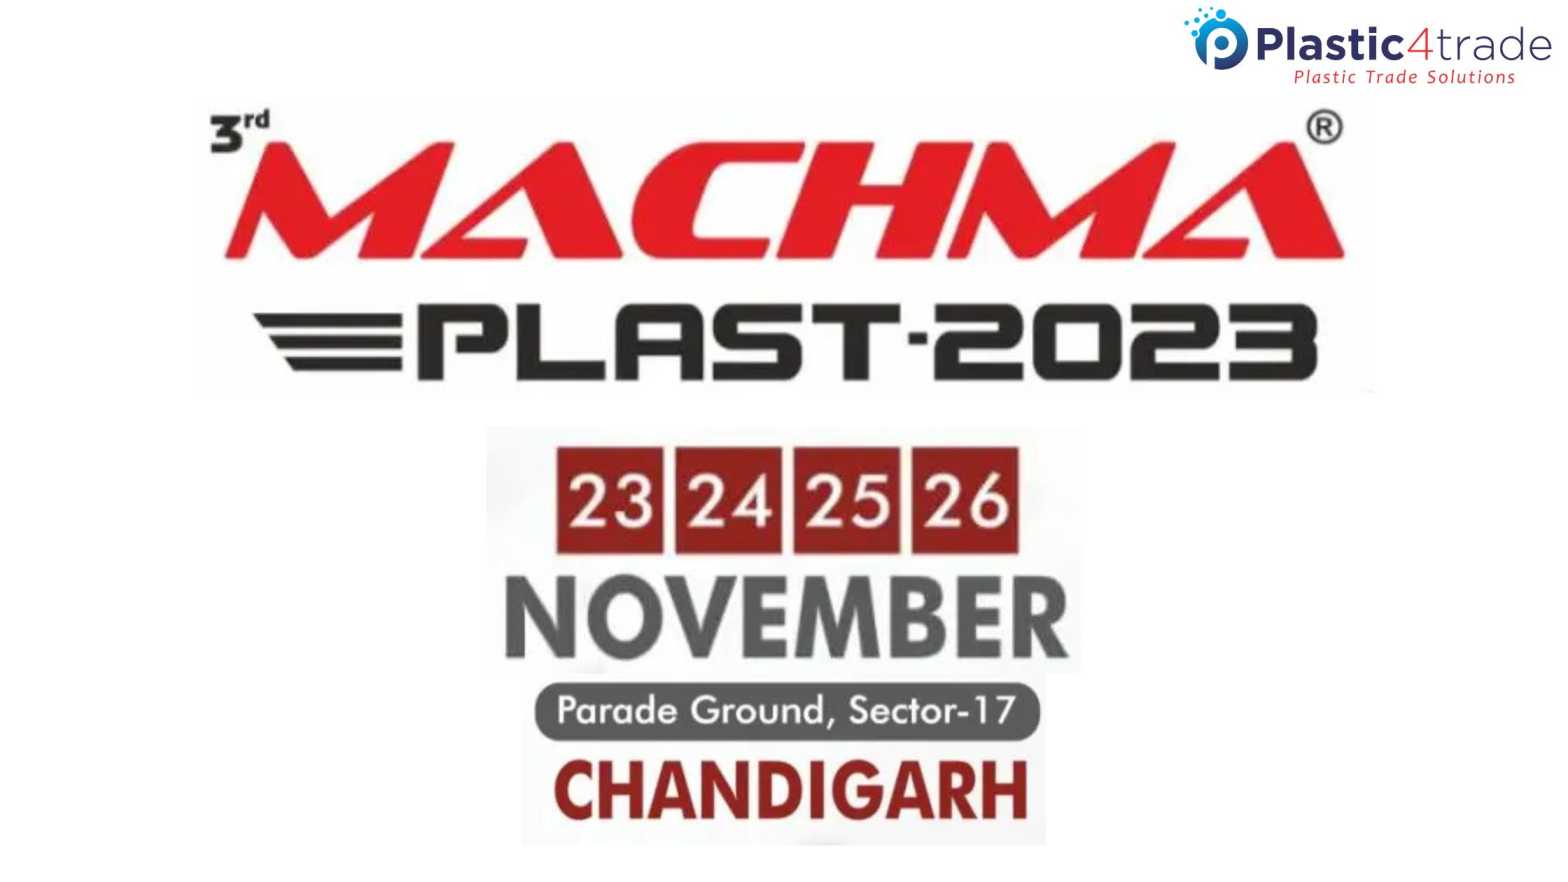 Machma Plastic and Technology Exhibition 2023 in Chandigarh India chandigarh chandigarh india